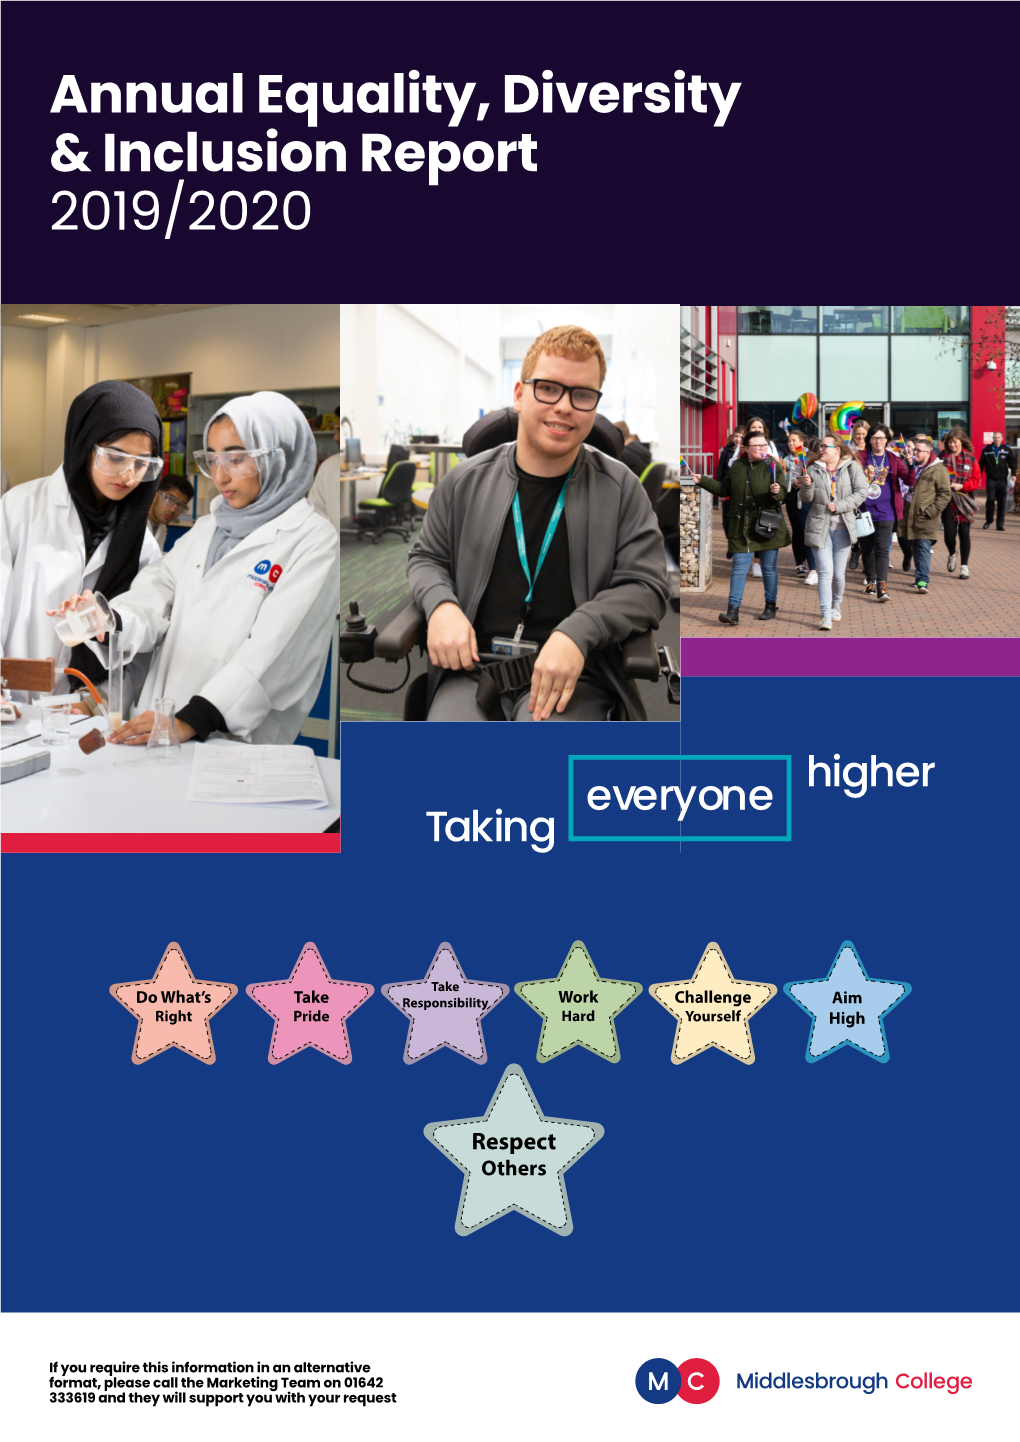 Annual Equality, Diversity & Inclusion Report 2019/2020